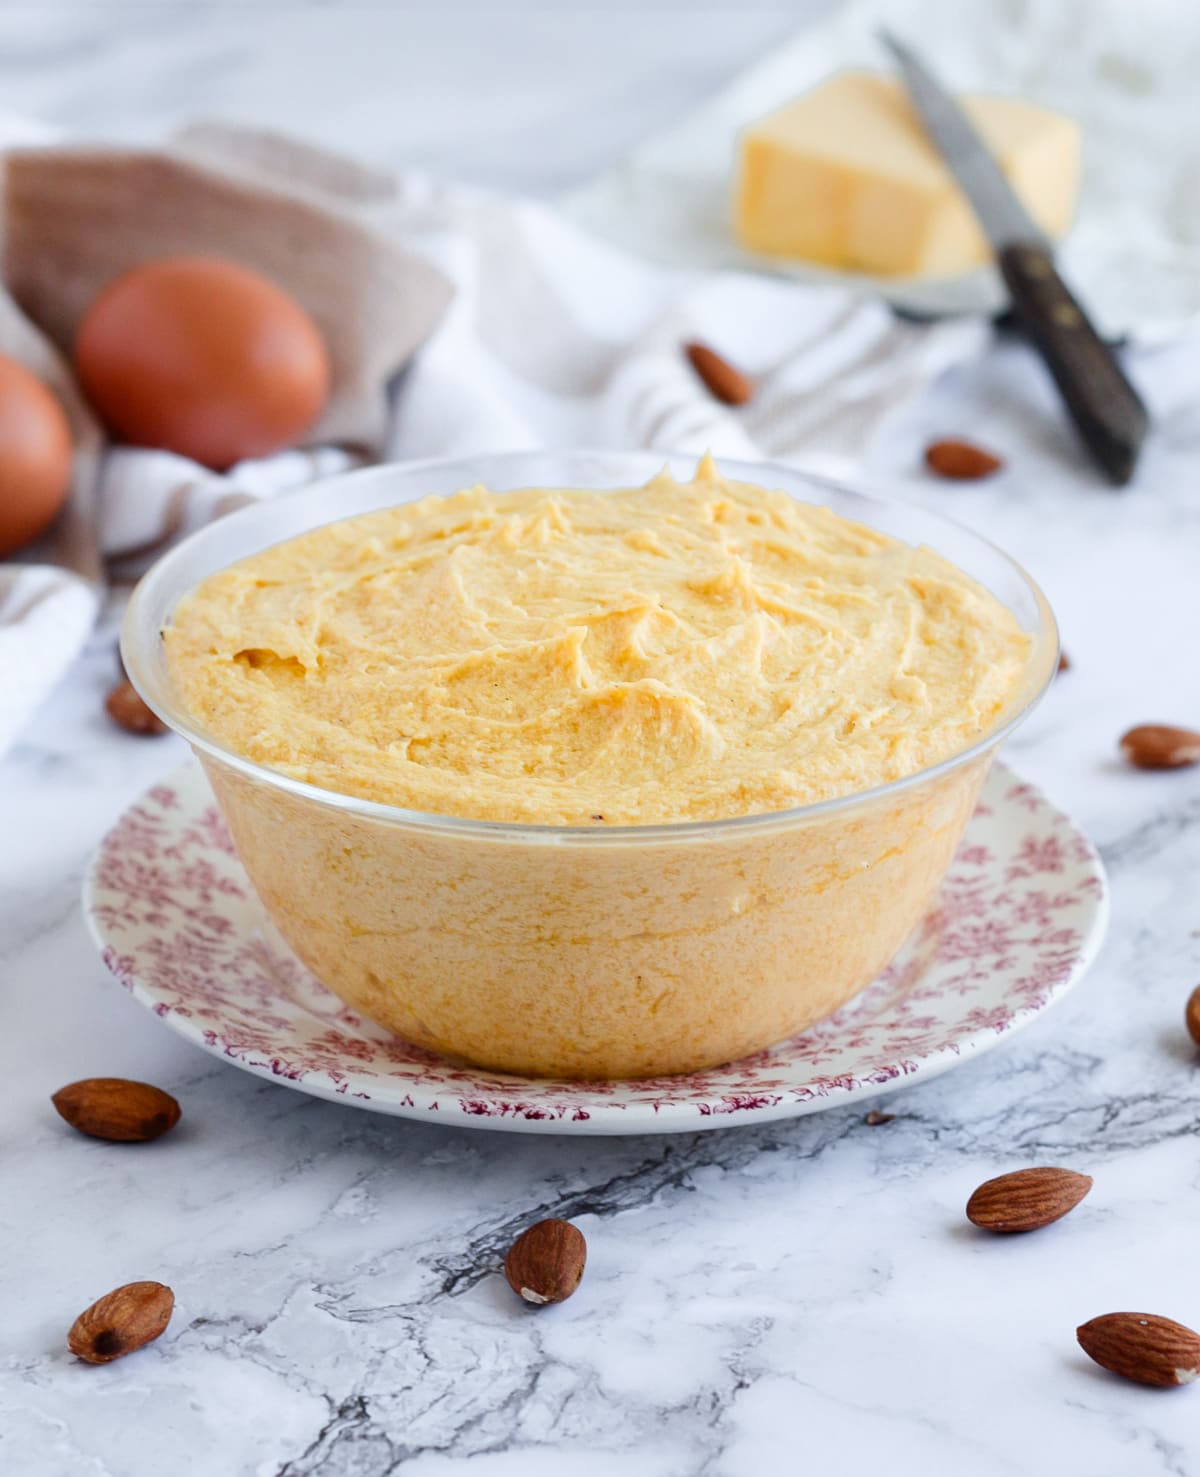 Cream in a glass bowl surrounded by almonds, eggs and butter.